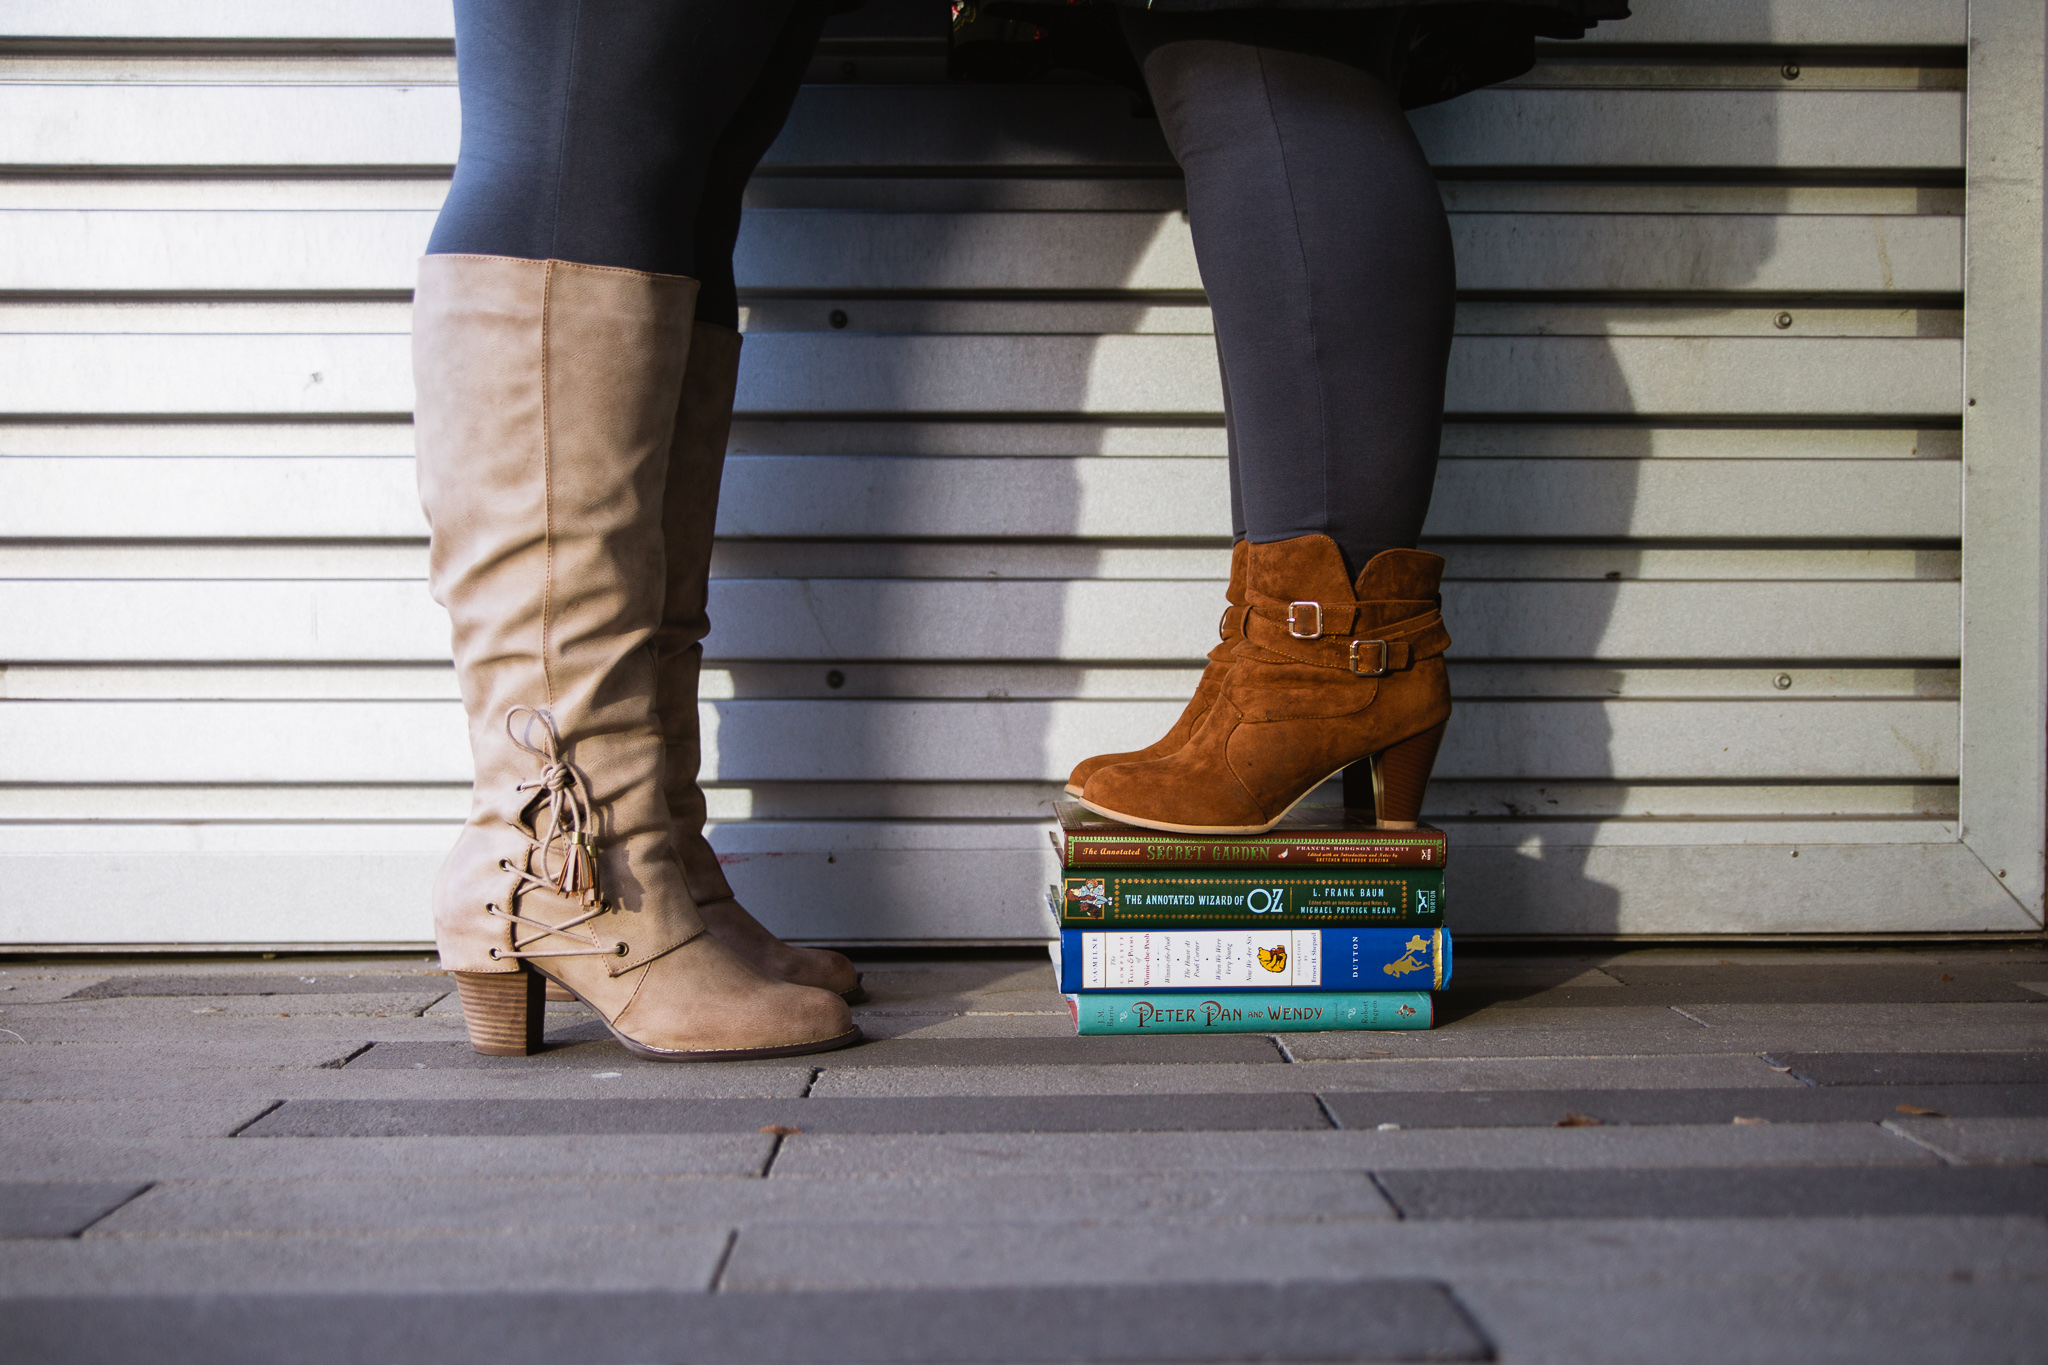 LGBTQ couple in tan boots standing on books during their engagement session.